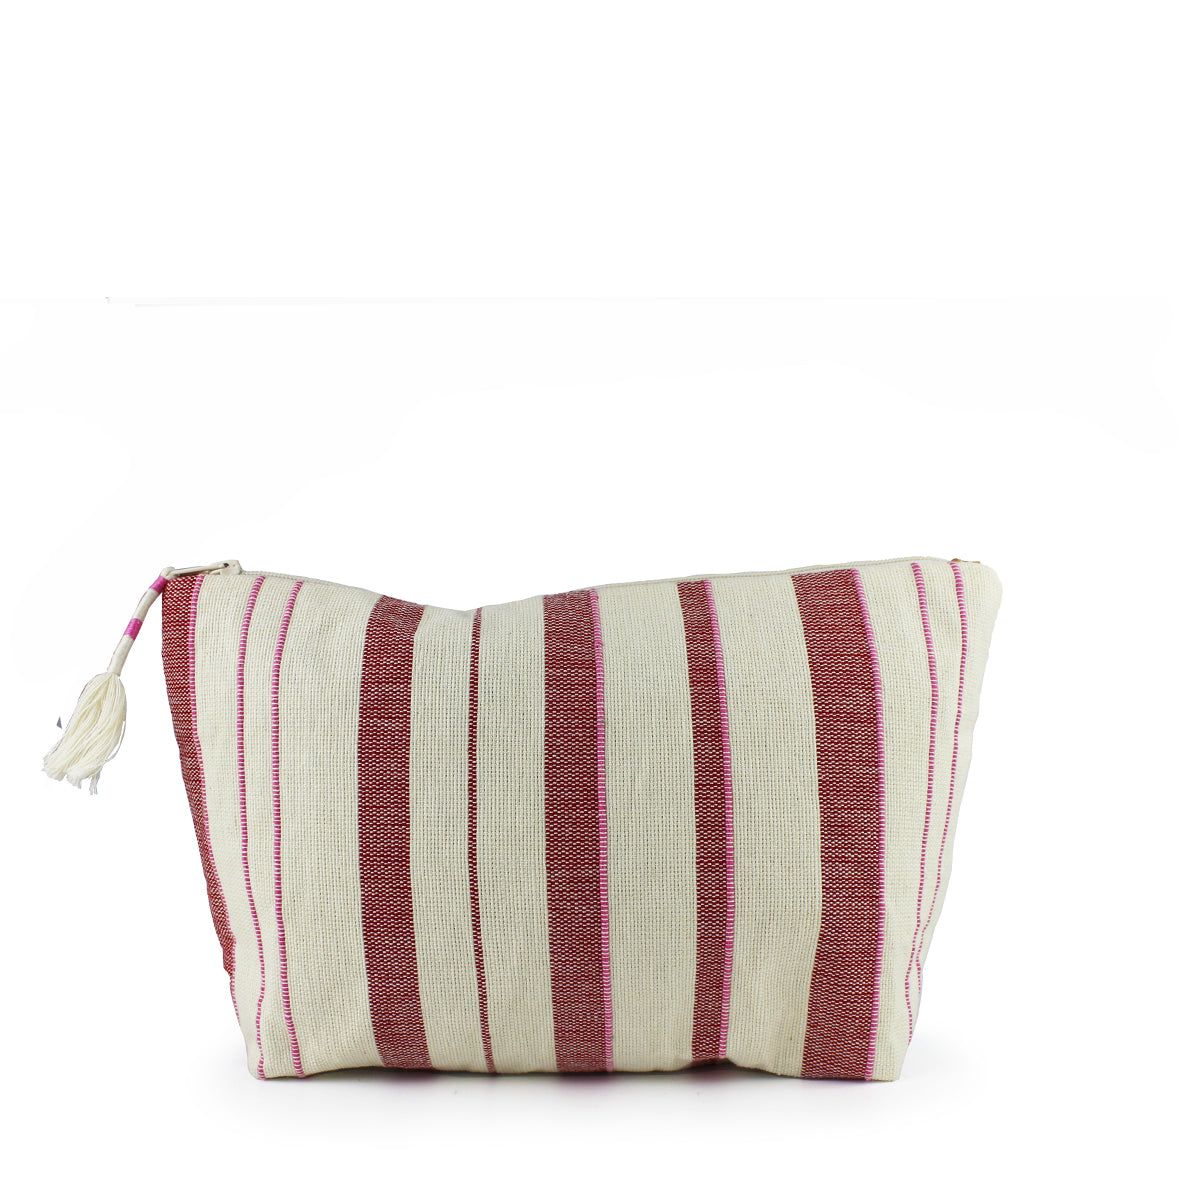 Front of the hand woven artisan Cristina Cosmetic Pouch in Denim Sunset. The front has red, pink, and white vertical stripes in various widths. It has a white tassel with pink wrapped stripes attached to the zipper.